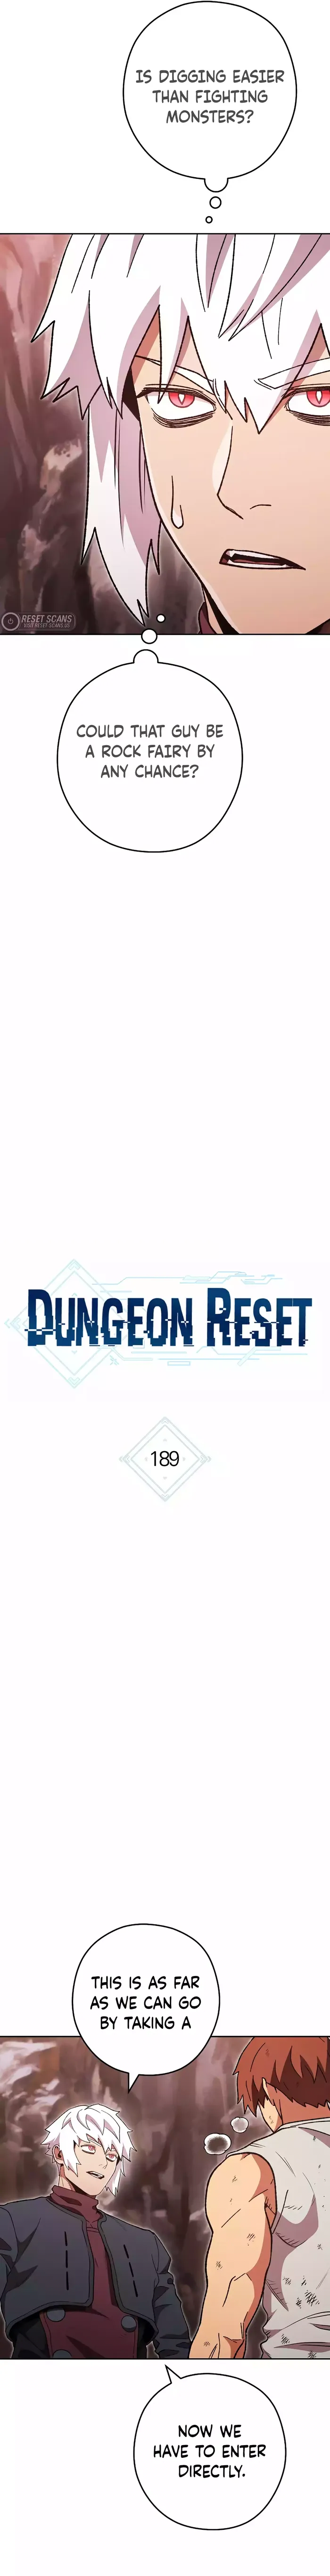 Dungeon Reset chapter 189